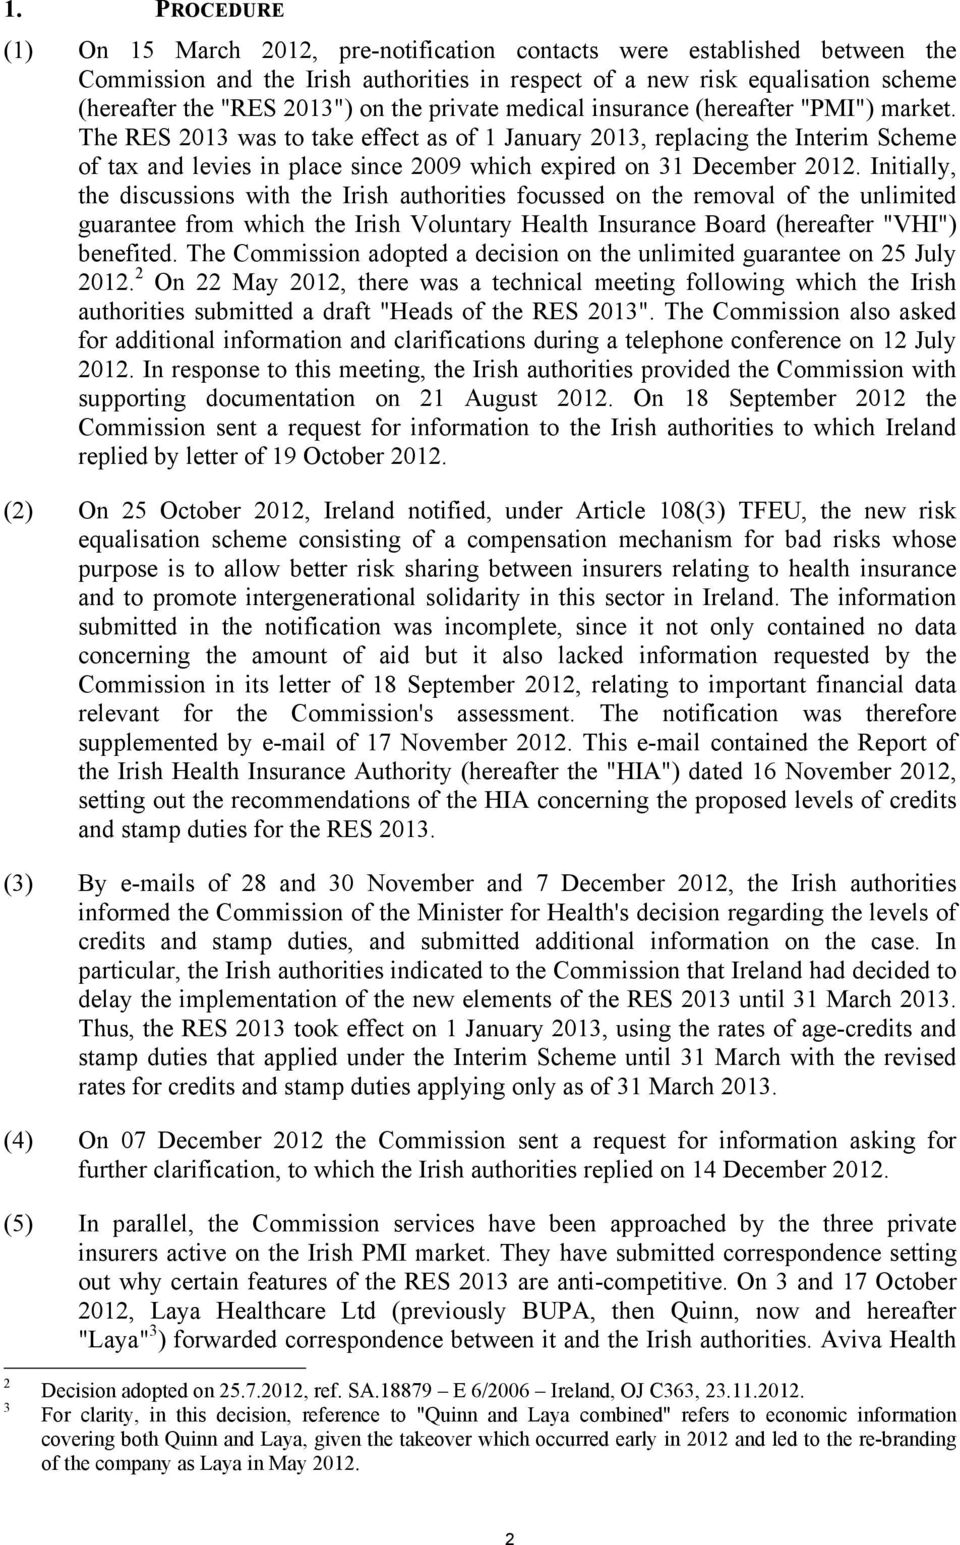 The RES 2013 was to take effect as of 1 January 2013, replacing the Interim Scheme of tax and levies in place since 2009 which expired on 31 December 2012.